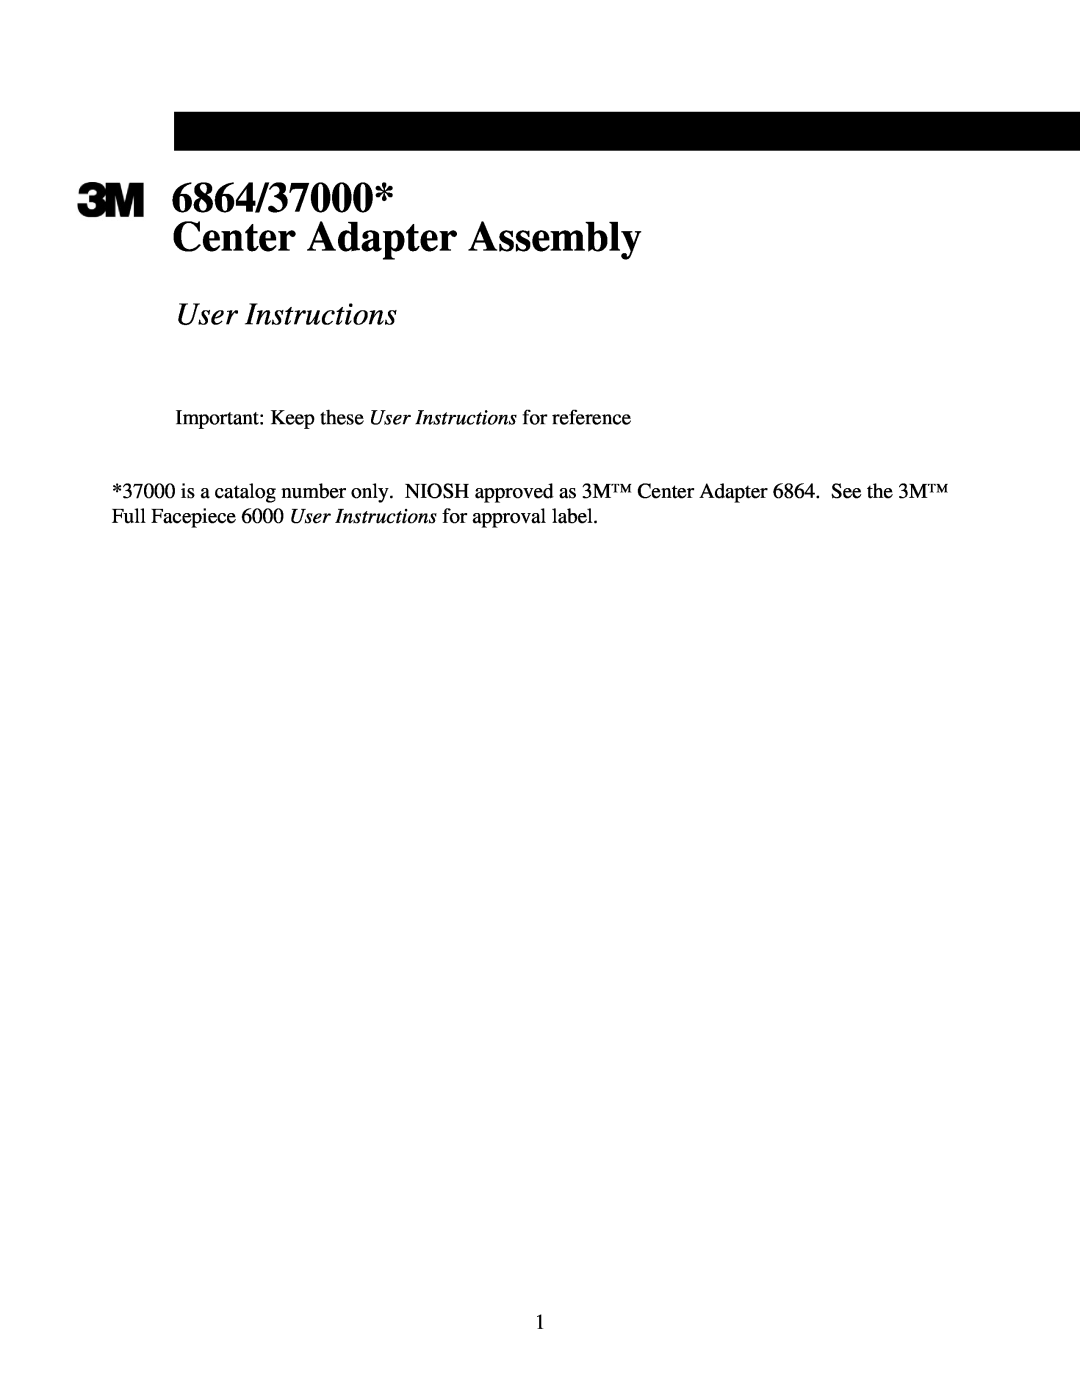 3M manual 6864/37000 Center Adapter Assembly, User Instructions 